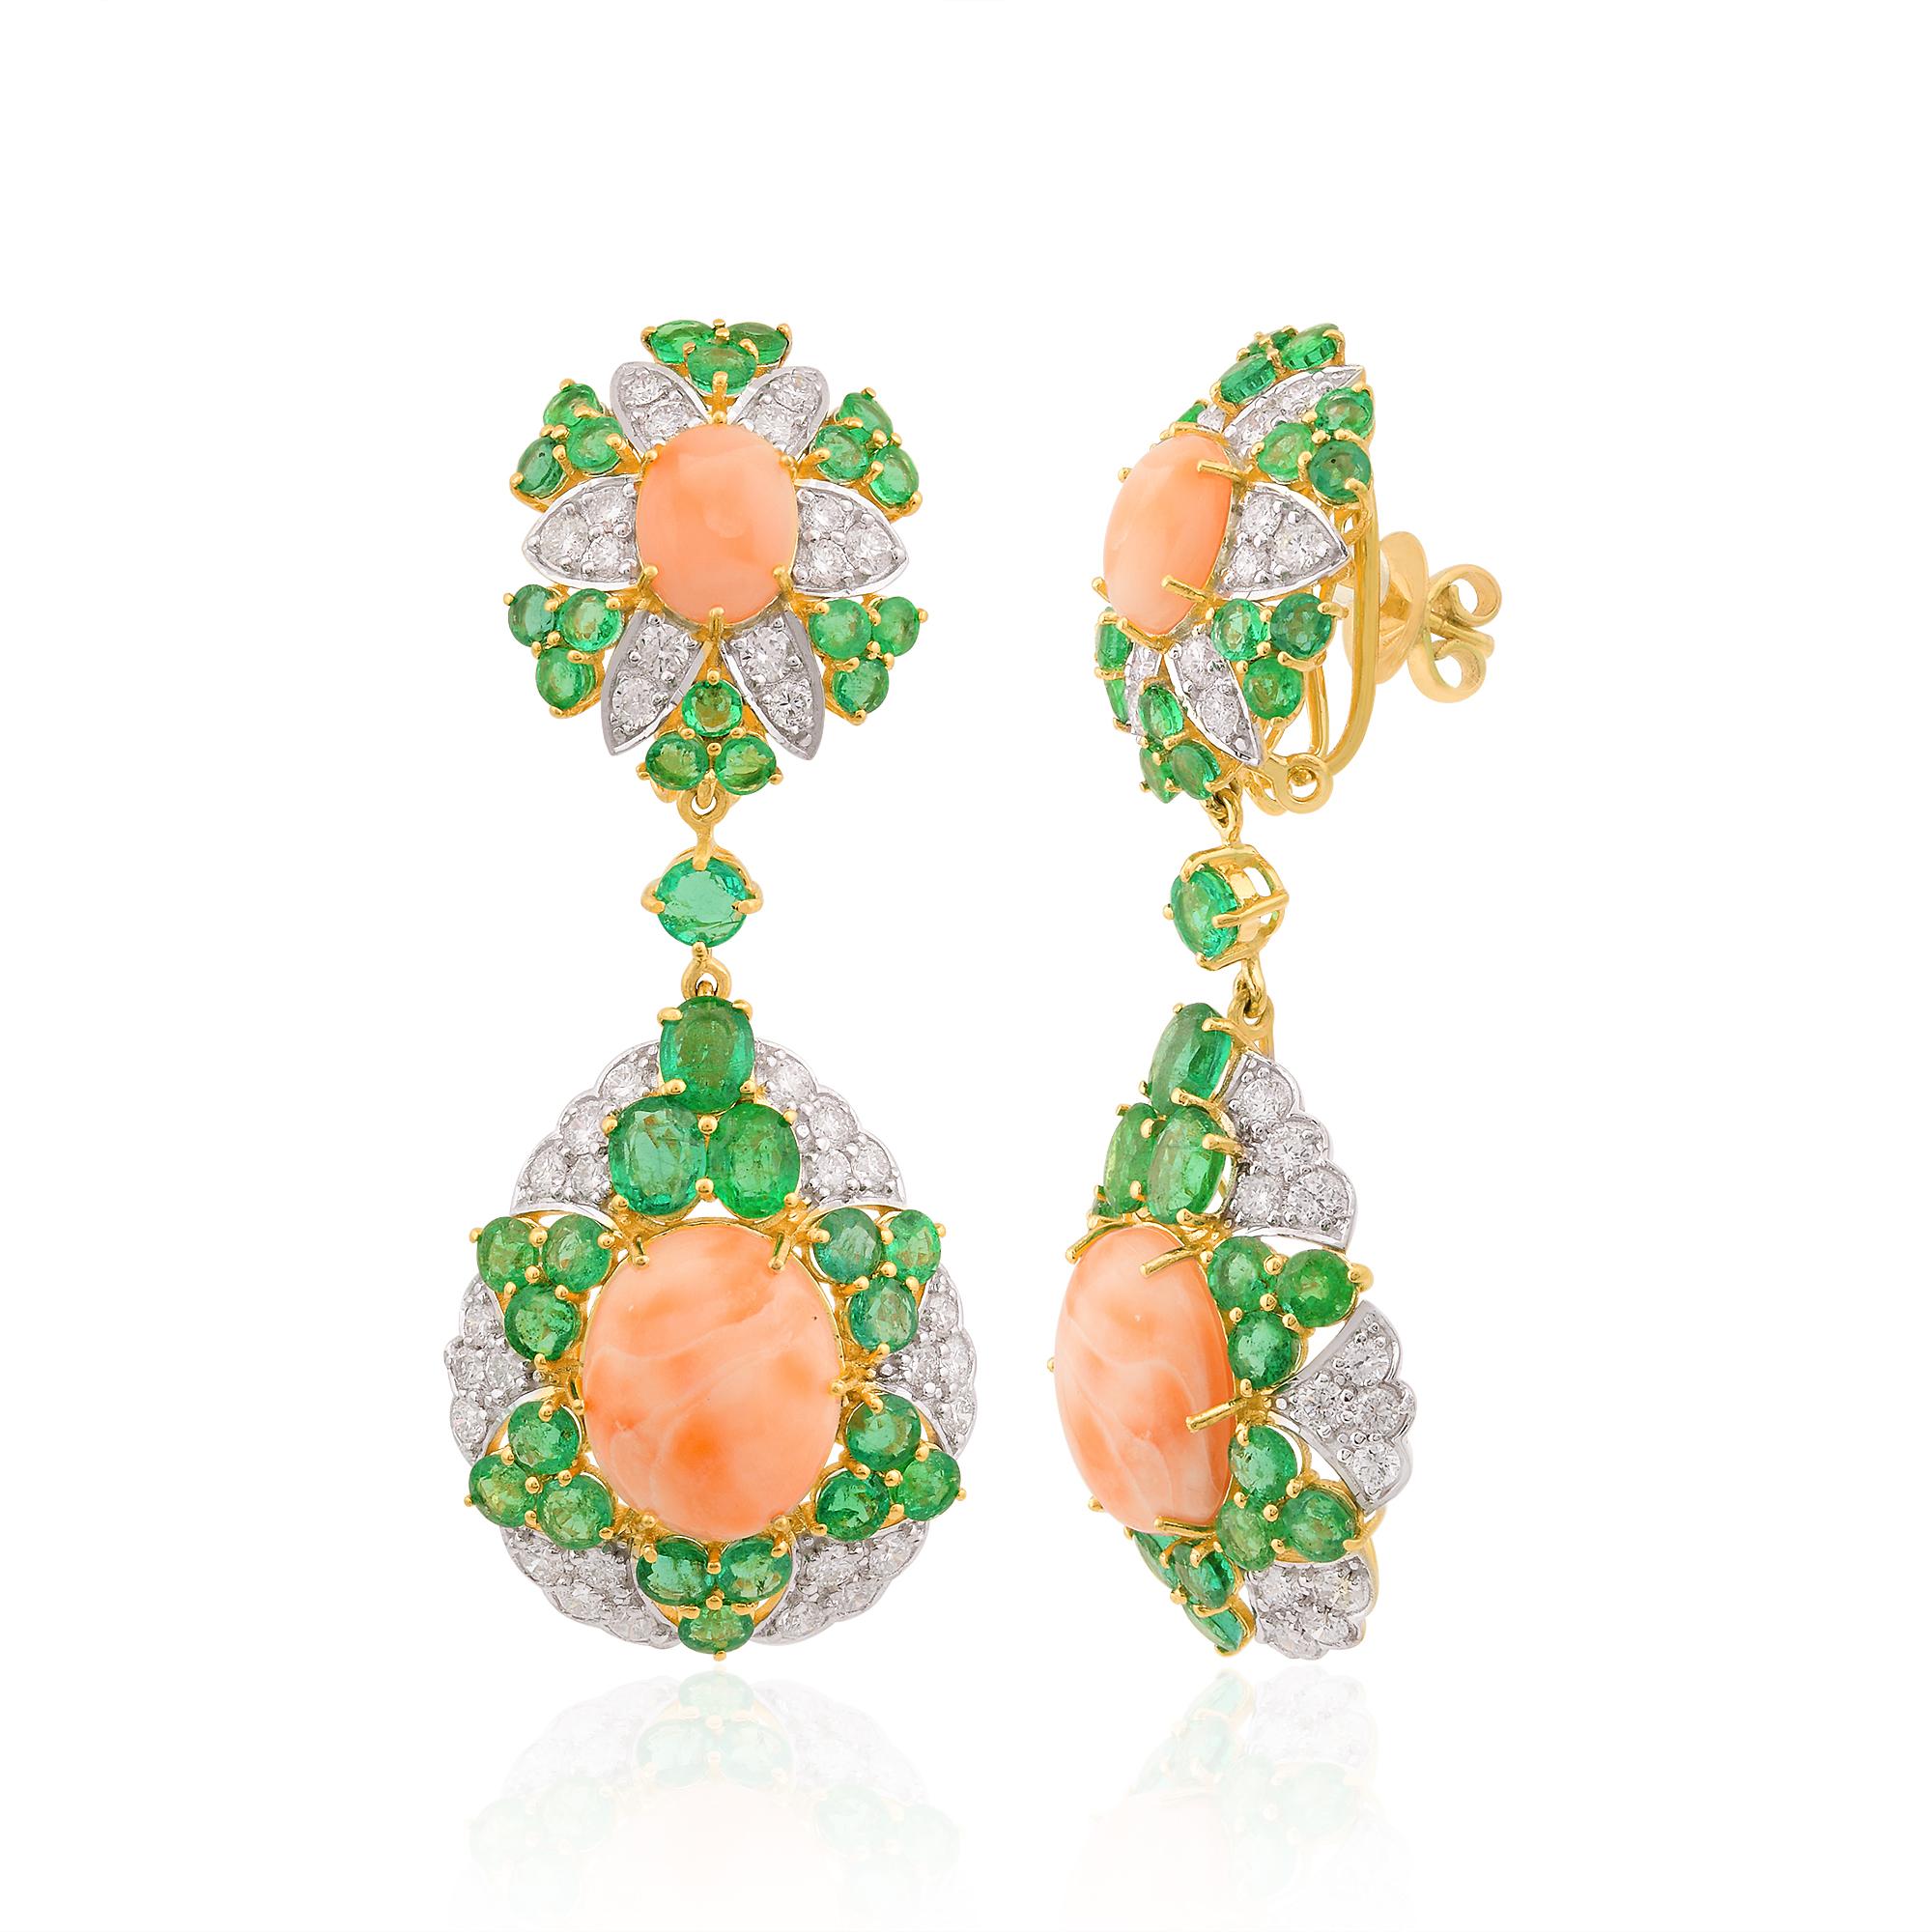 Item Code:- SEE-1602A
Gross Wt :- 23.08 gm
18k Solid Yellow Gold Wt :- 17.660 gm
Natural Diamond Wt :- 3.400 ct. ( AVERAGE DIAMOND CLARITY SI1-SI2 & COLOR H-I )
Coral & Emerald Wt :- 23.680 ct.
Earrings Size:- 20x58 mm approx

✦